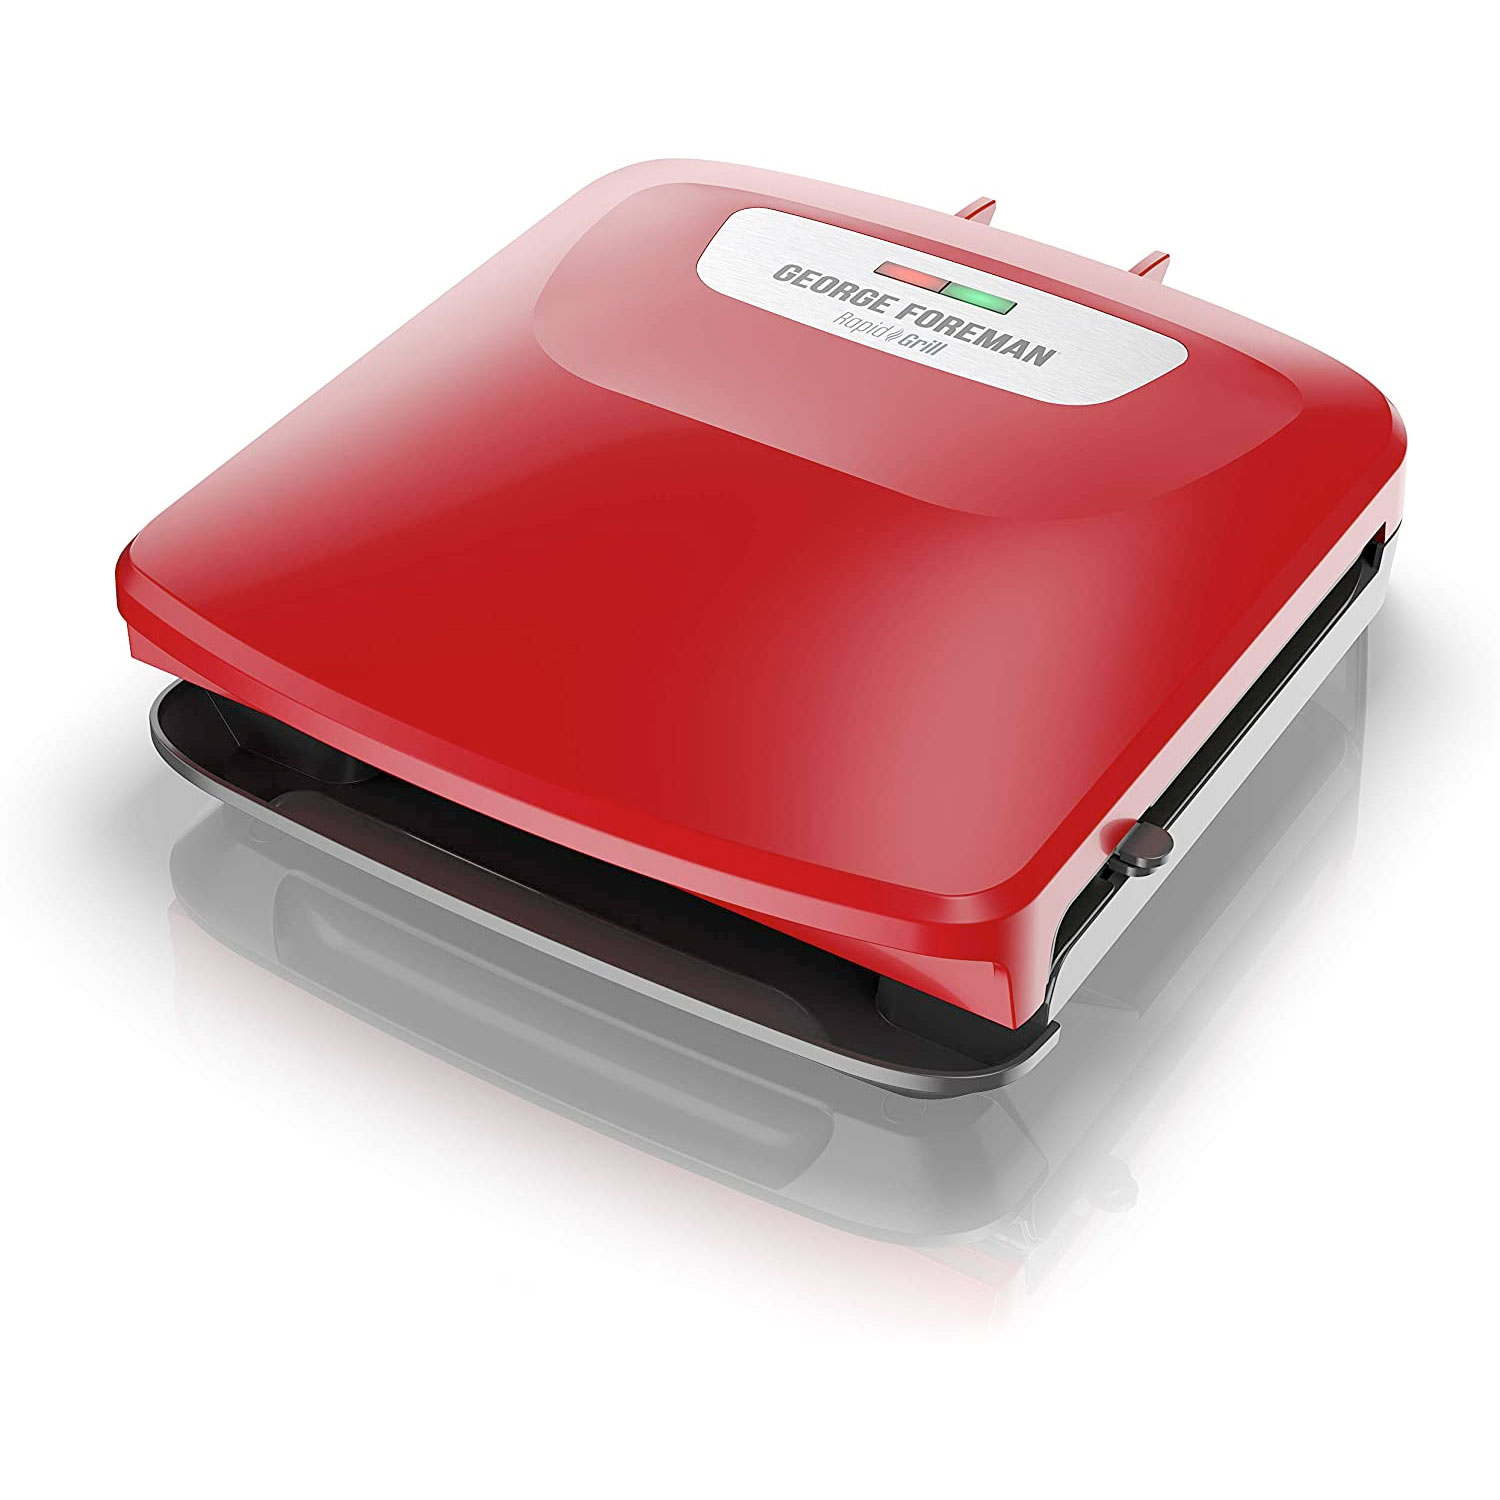 Amazon：George Foreman 4 Serving Electric Grill and Panini Press只卖$24